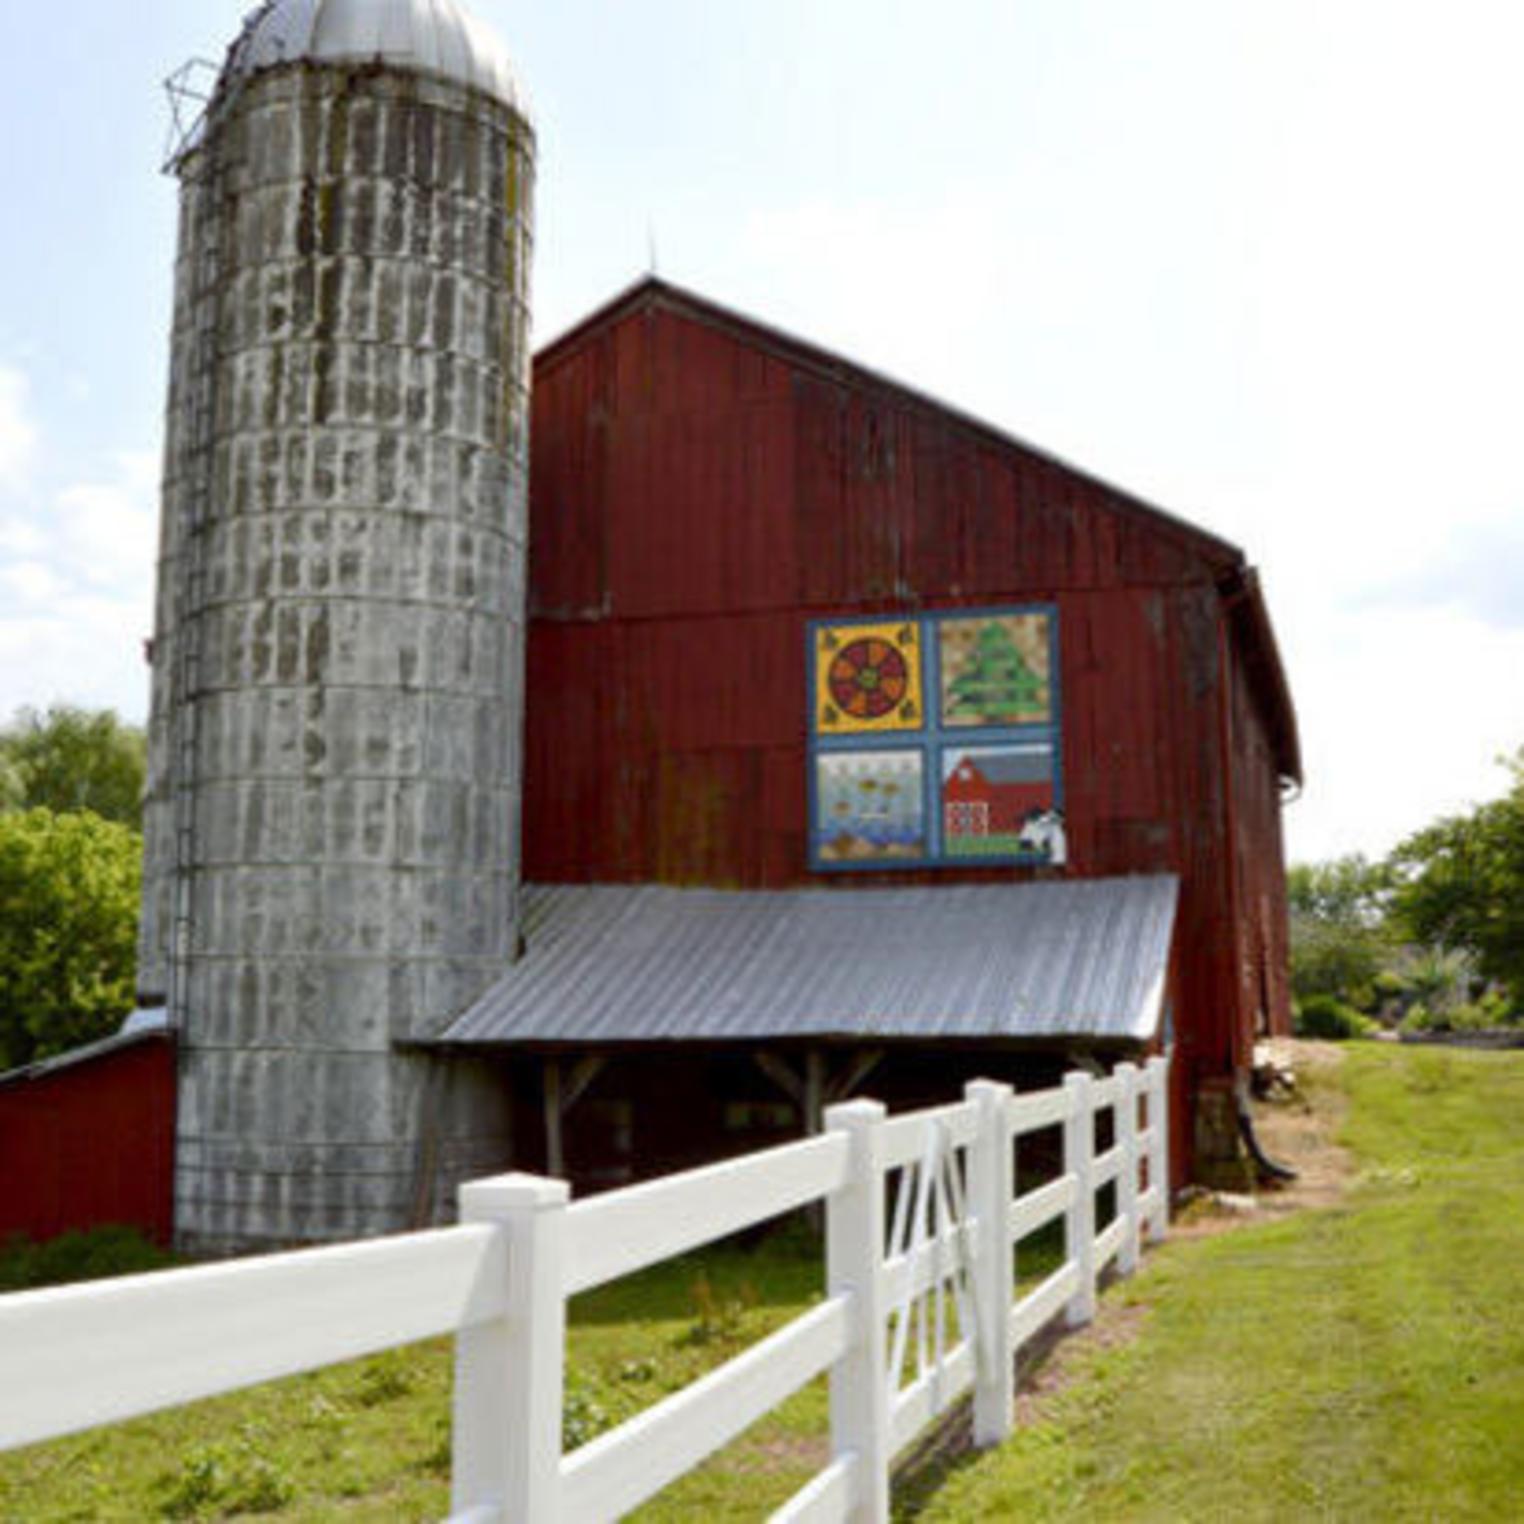 PCCA Gallery Quilt Barn Trail